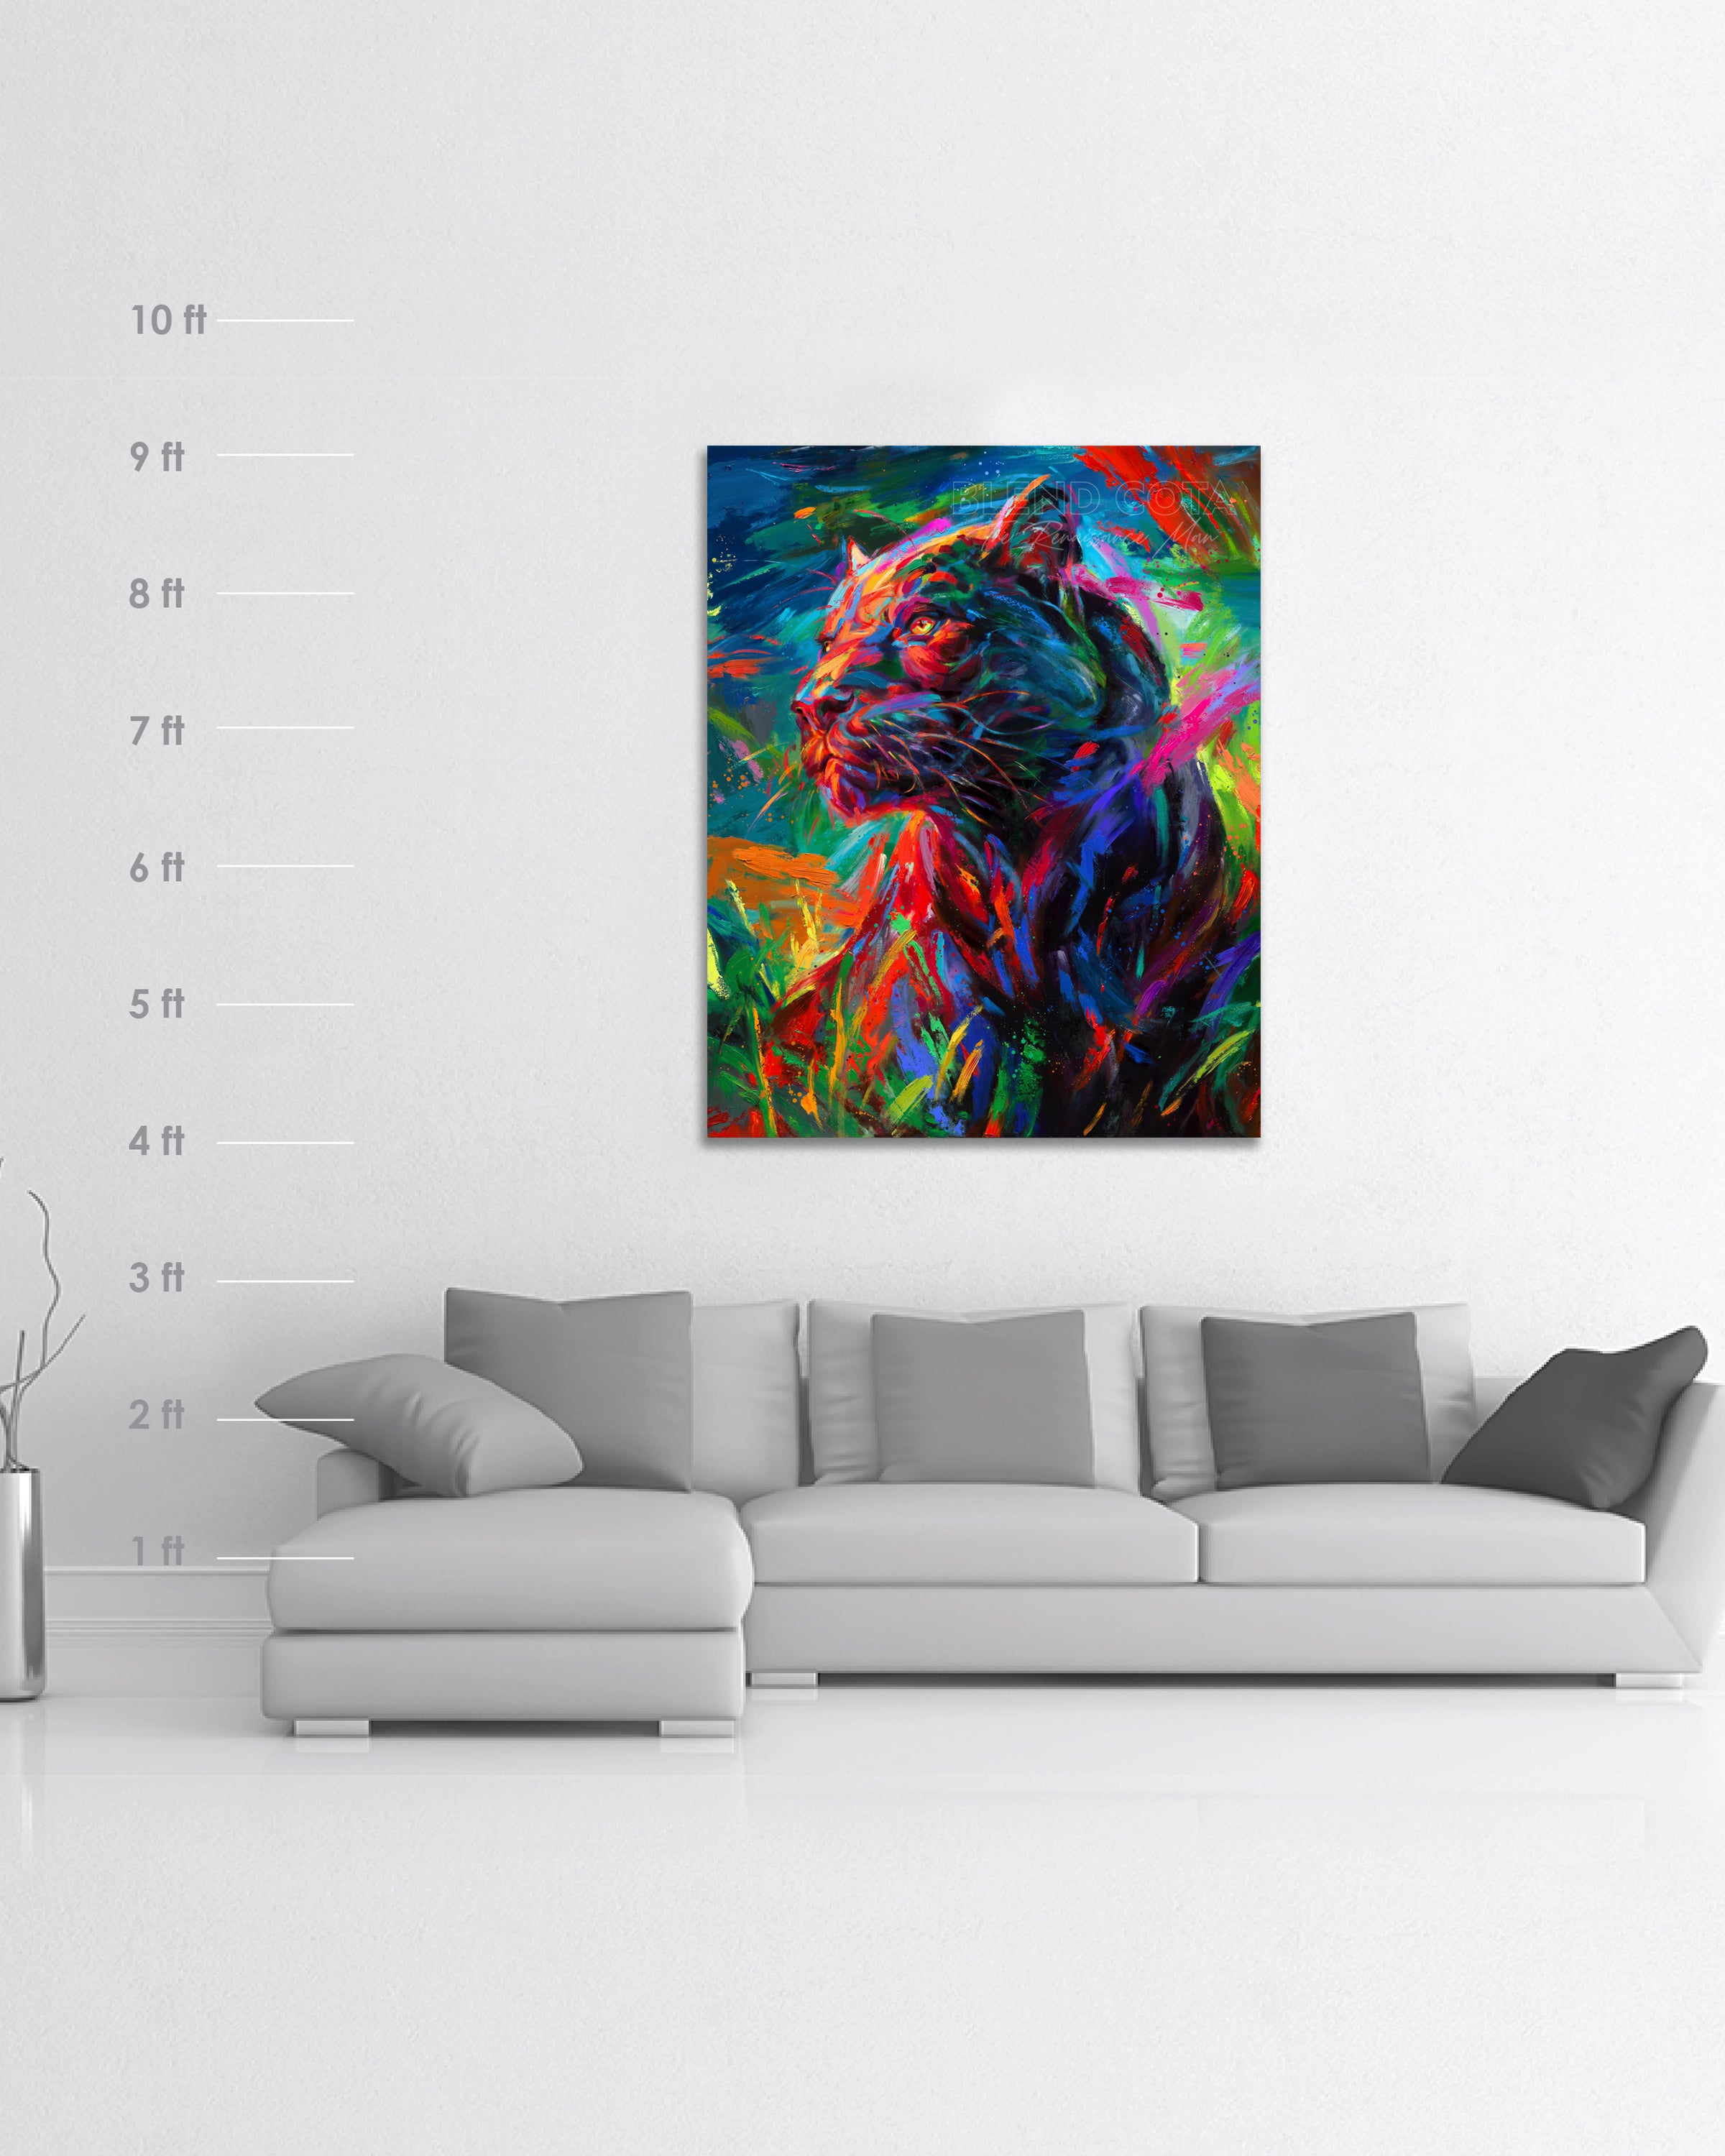 
                  
                    Framed original oil painting on canvas of the black panther stalking its prey through the long night painted with colorful brushstrokes in an expressionistic style in a room setting with scale dimensions.
                  
                